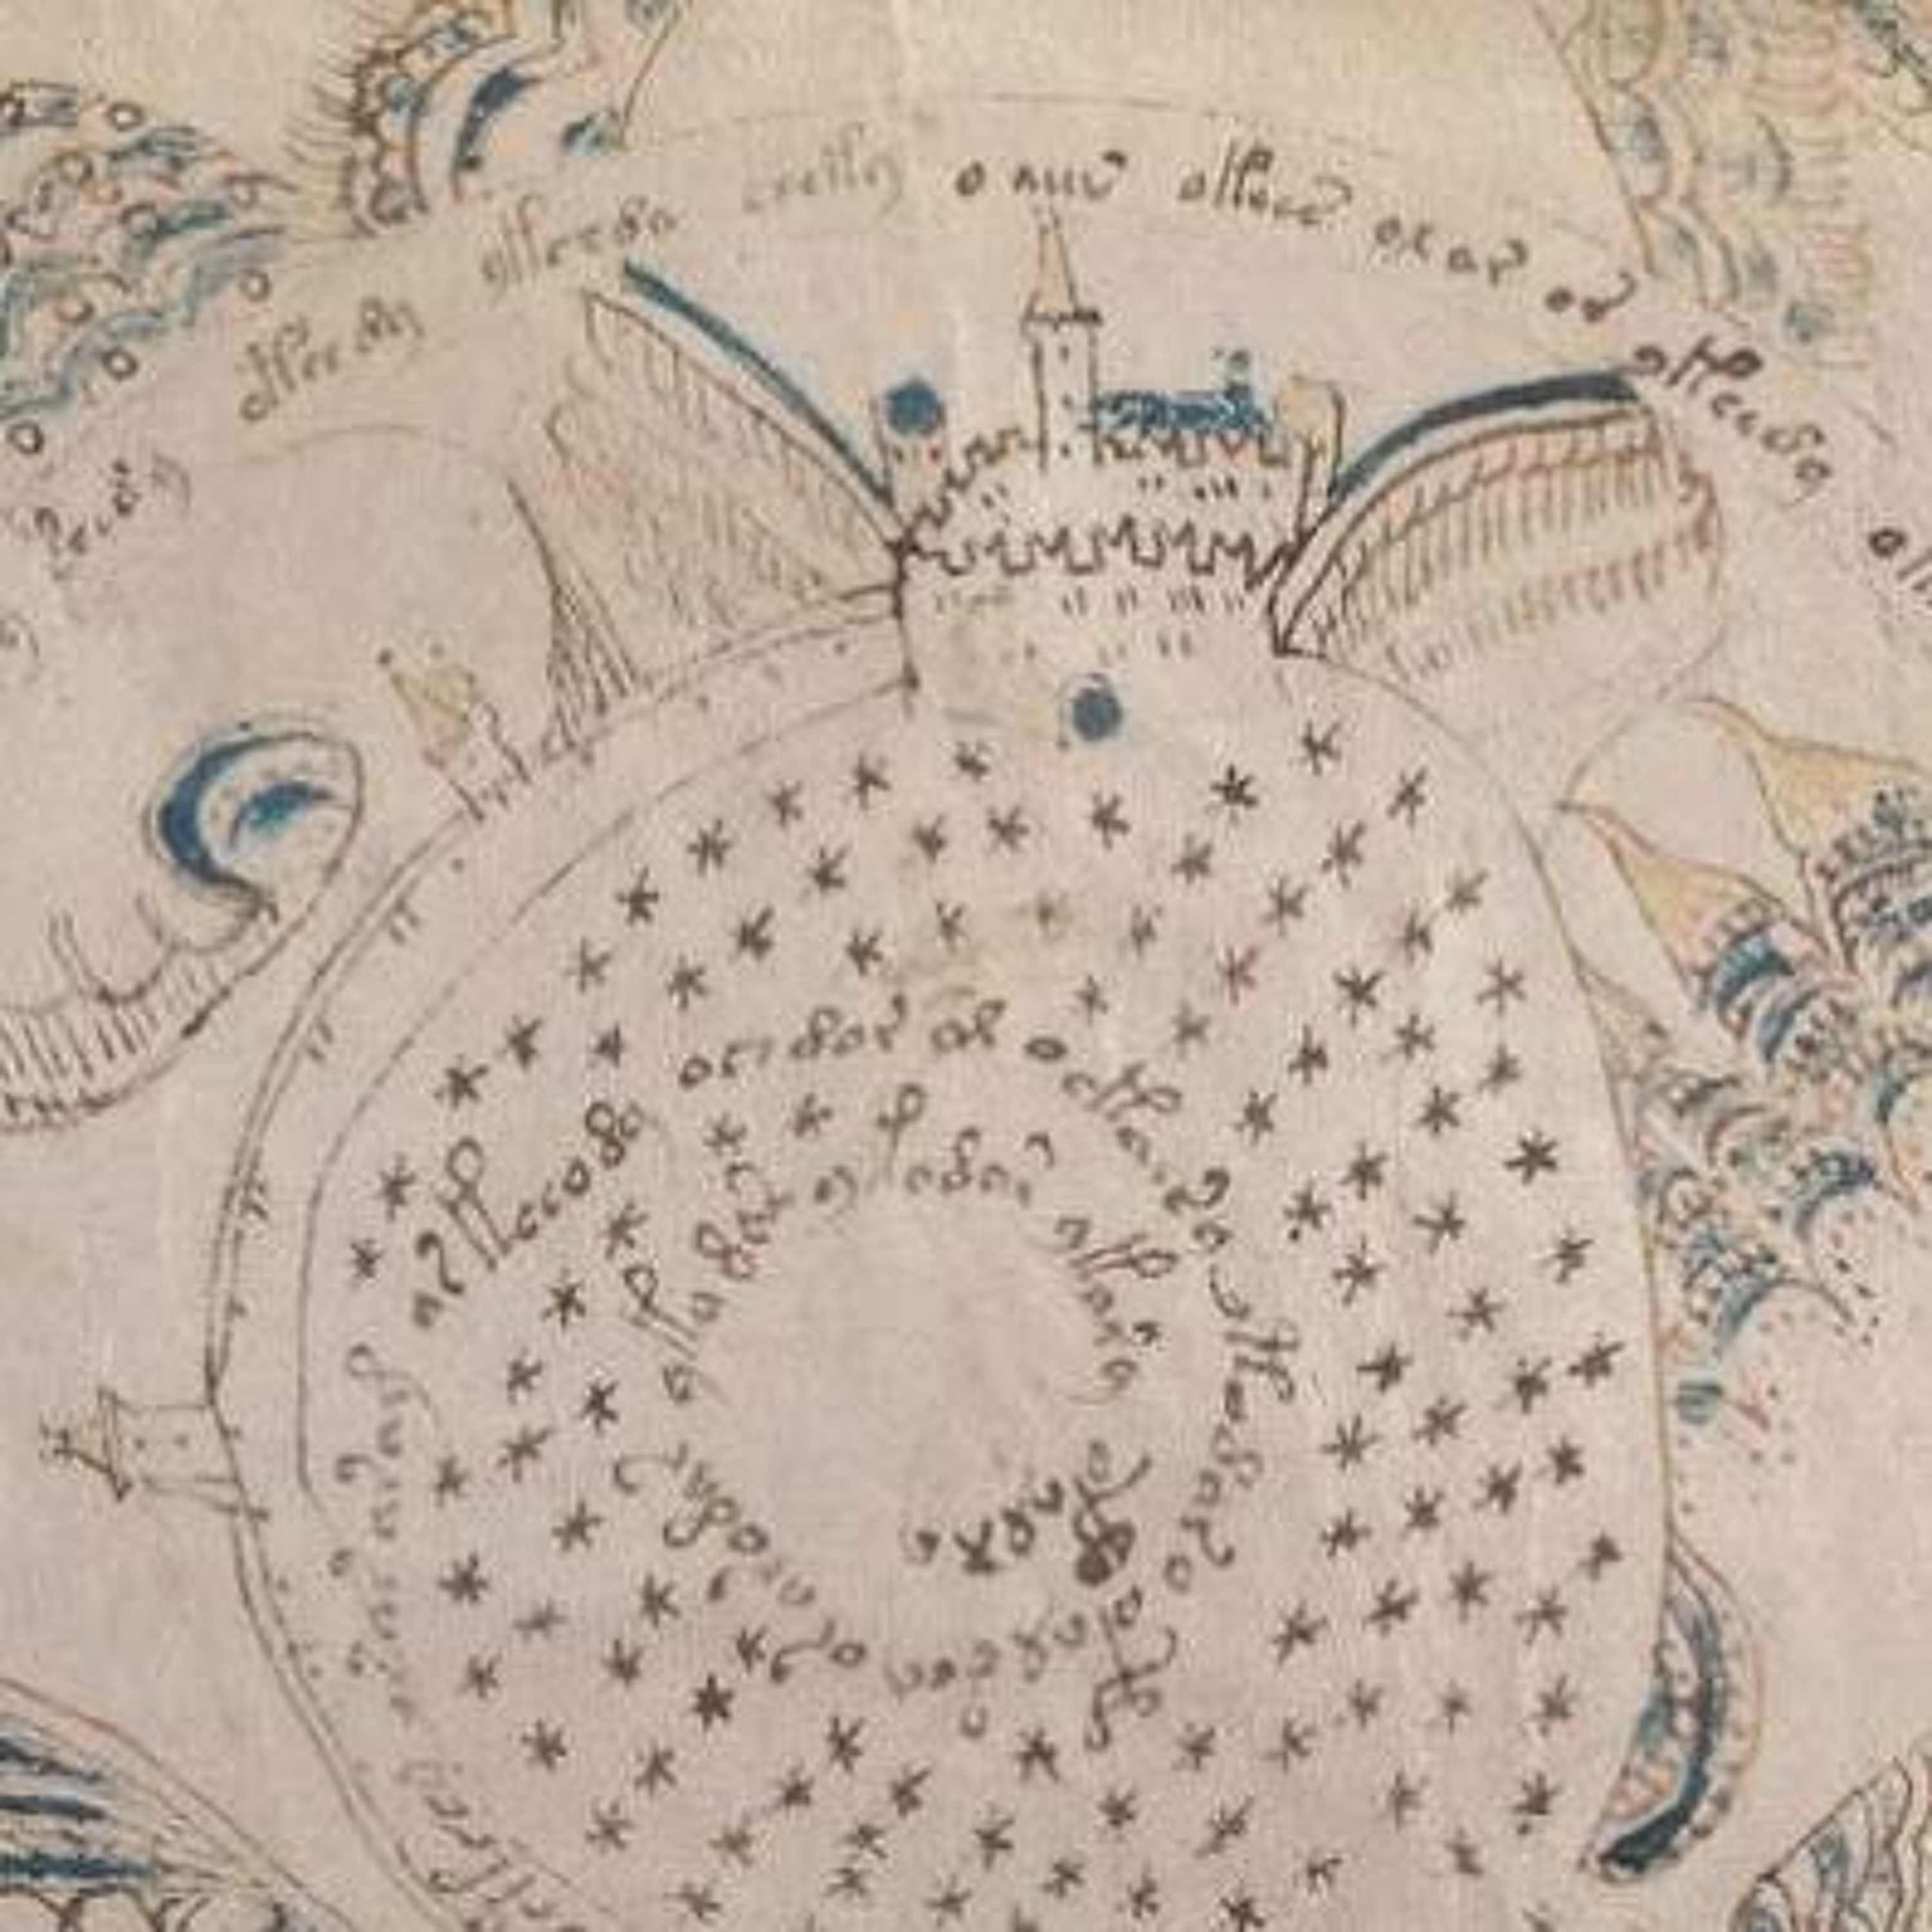 The Voynich Manuscript, the ”World’s Most Mysterious Book” -- A Historian’s View -- pt. 1